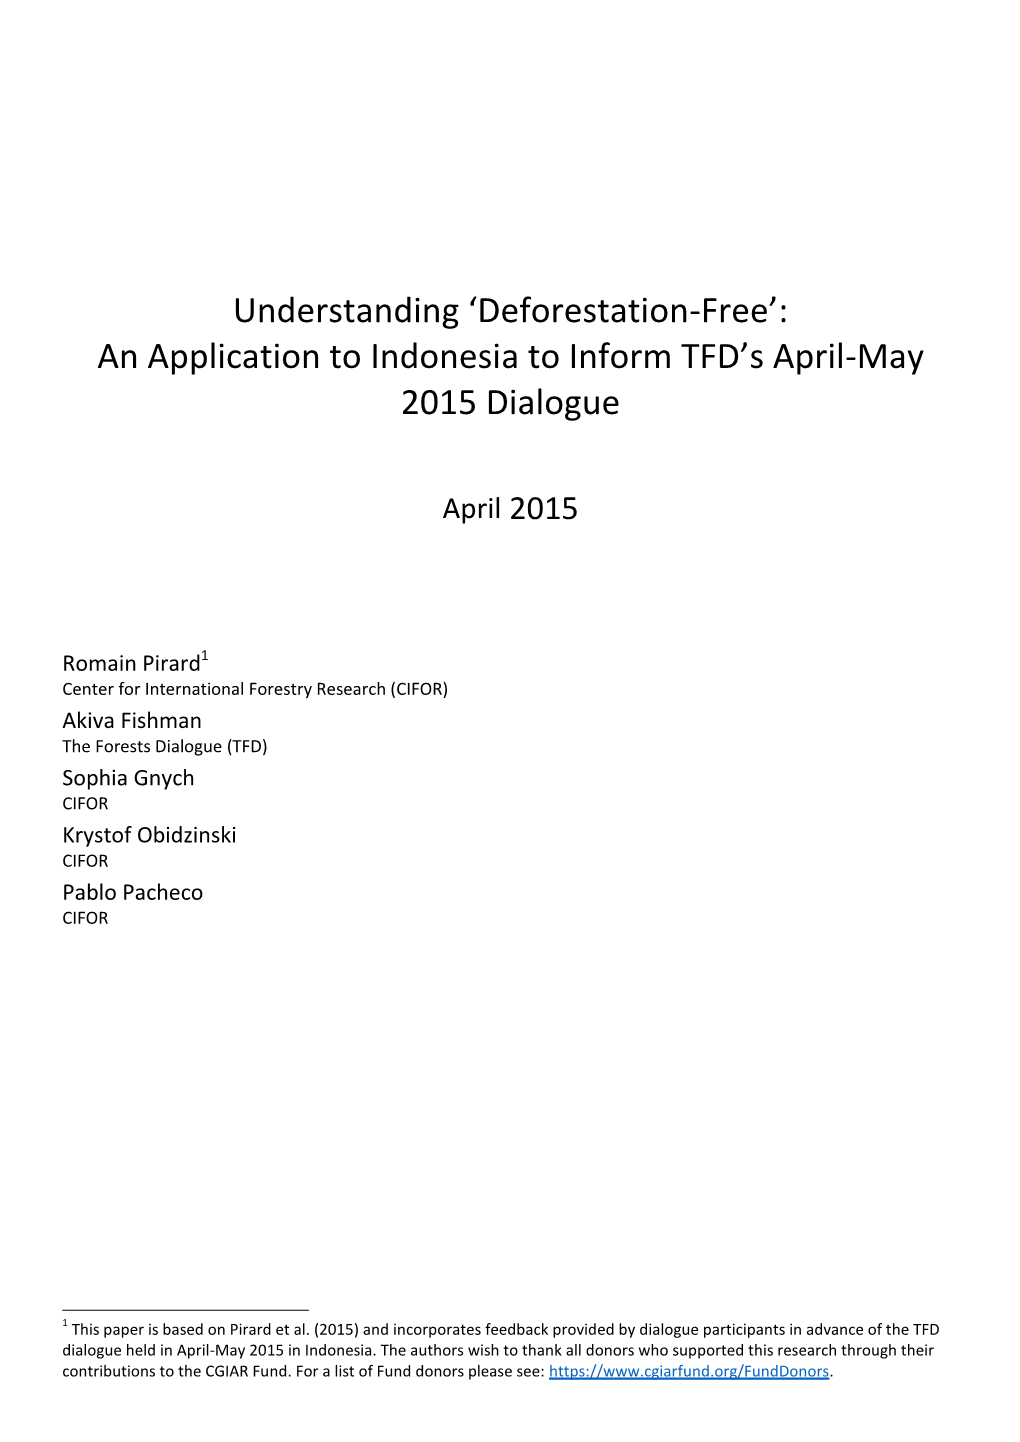 'Deforestation-Free': an Application to Indonesia to Inform TFD's April-May